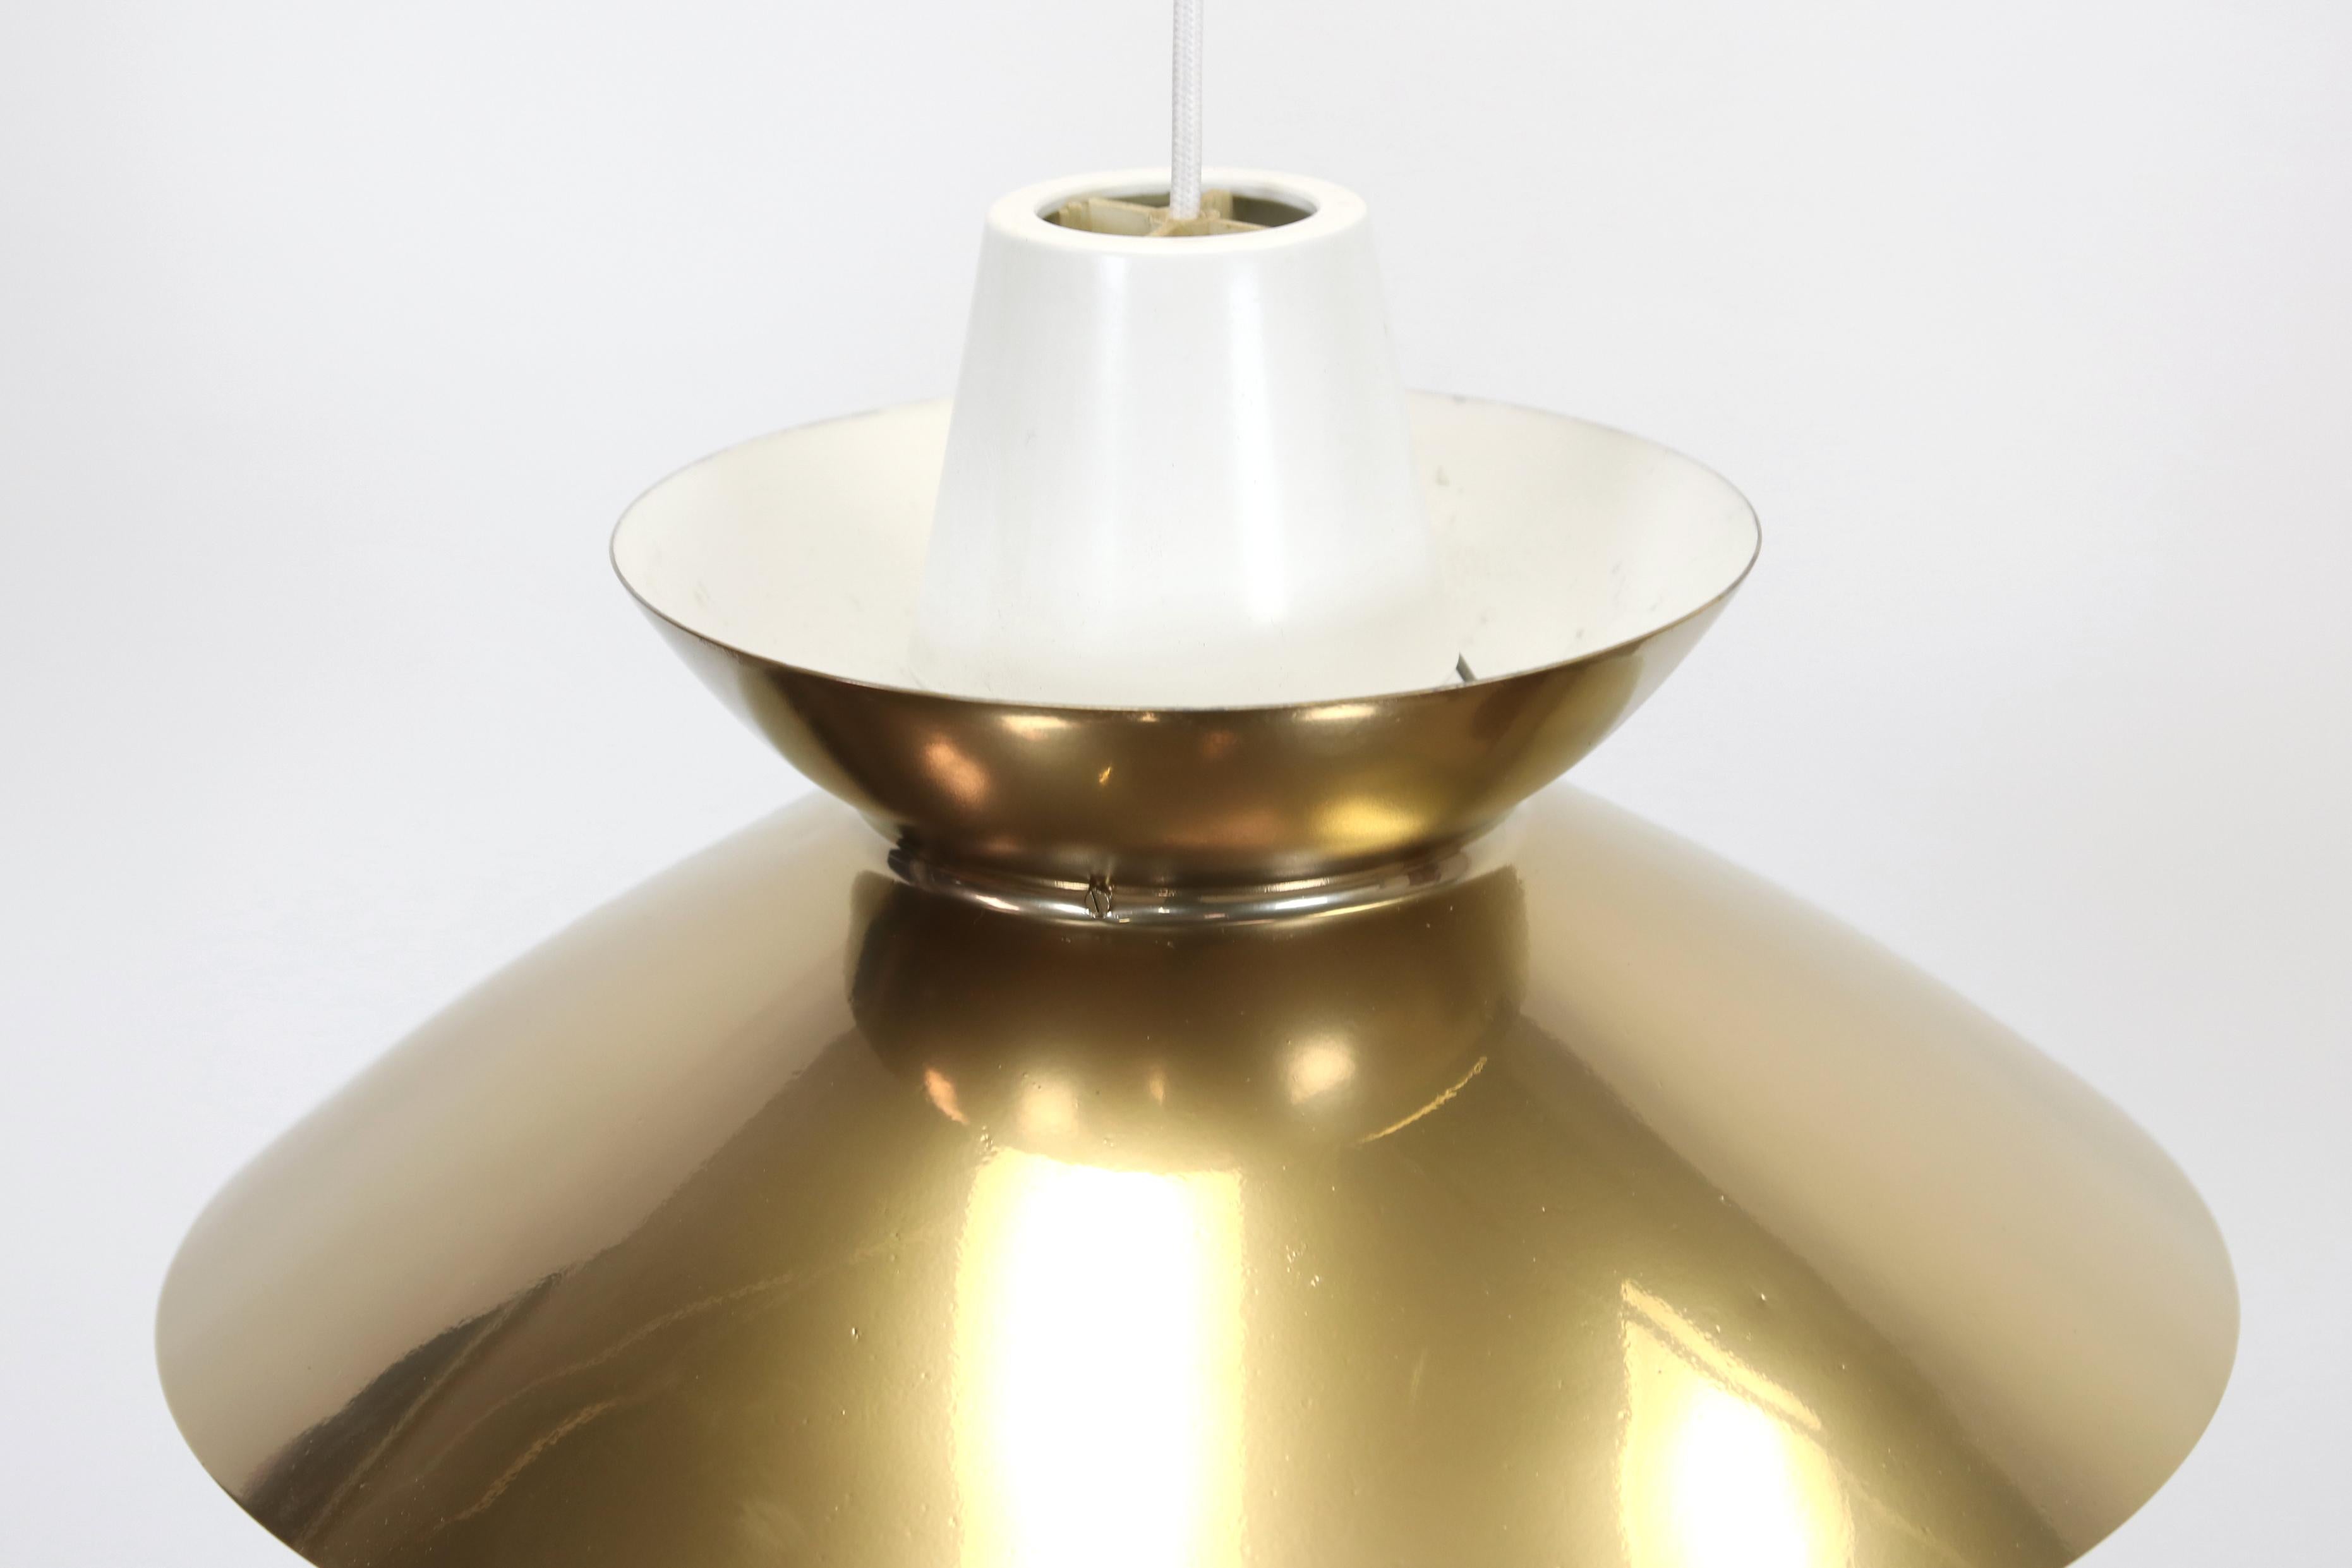 Large version of the lamp by Jorn Utzon for Nordisk Solar. Jorn Utzon has become world famous as the architect of the opera house in Sydney. The 